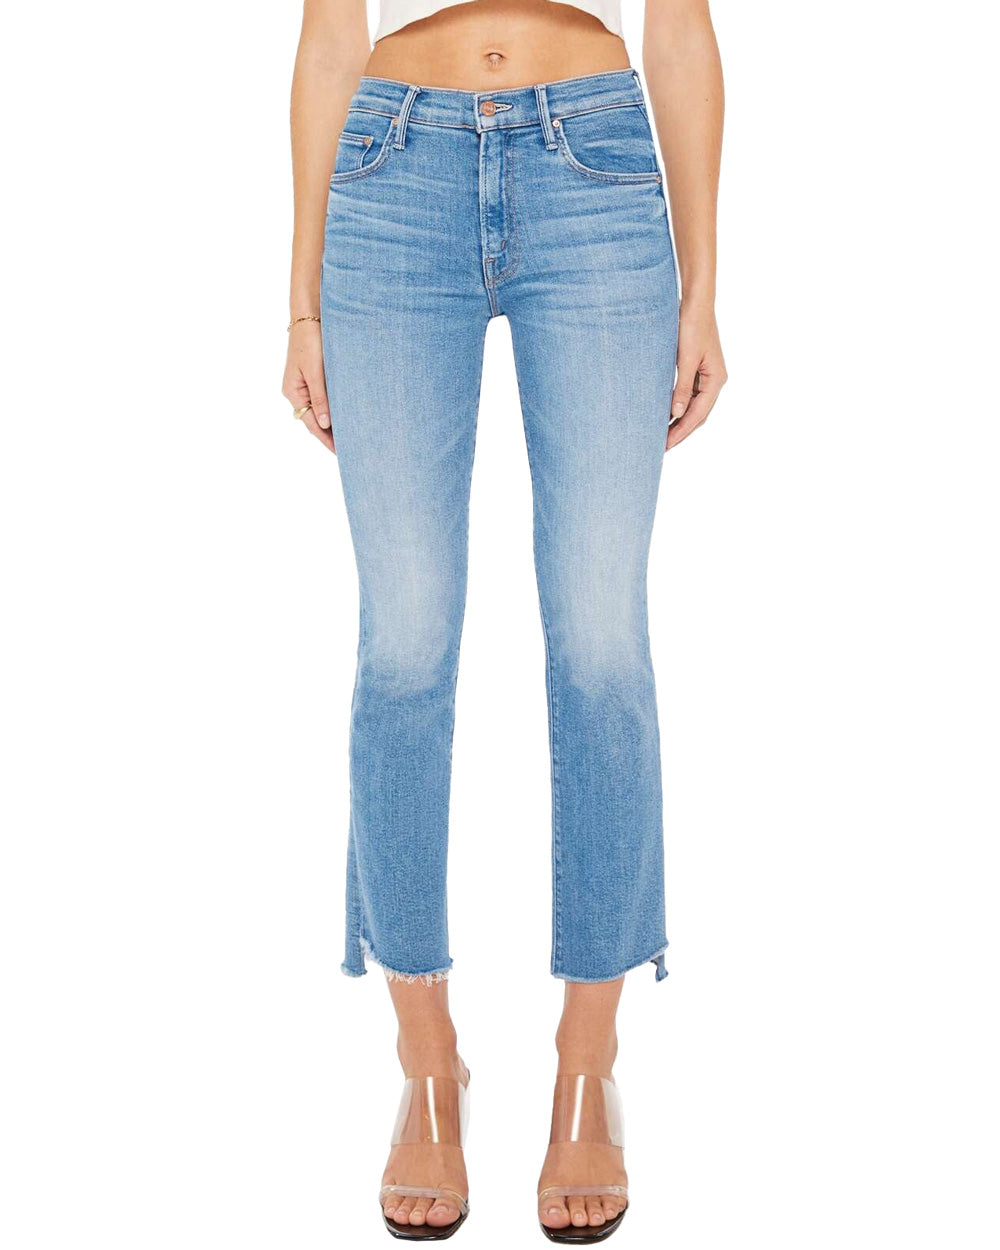 The Insider Crop Step Fray Jean in Out Of The Blue